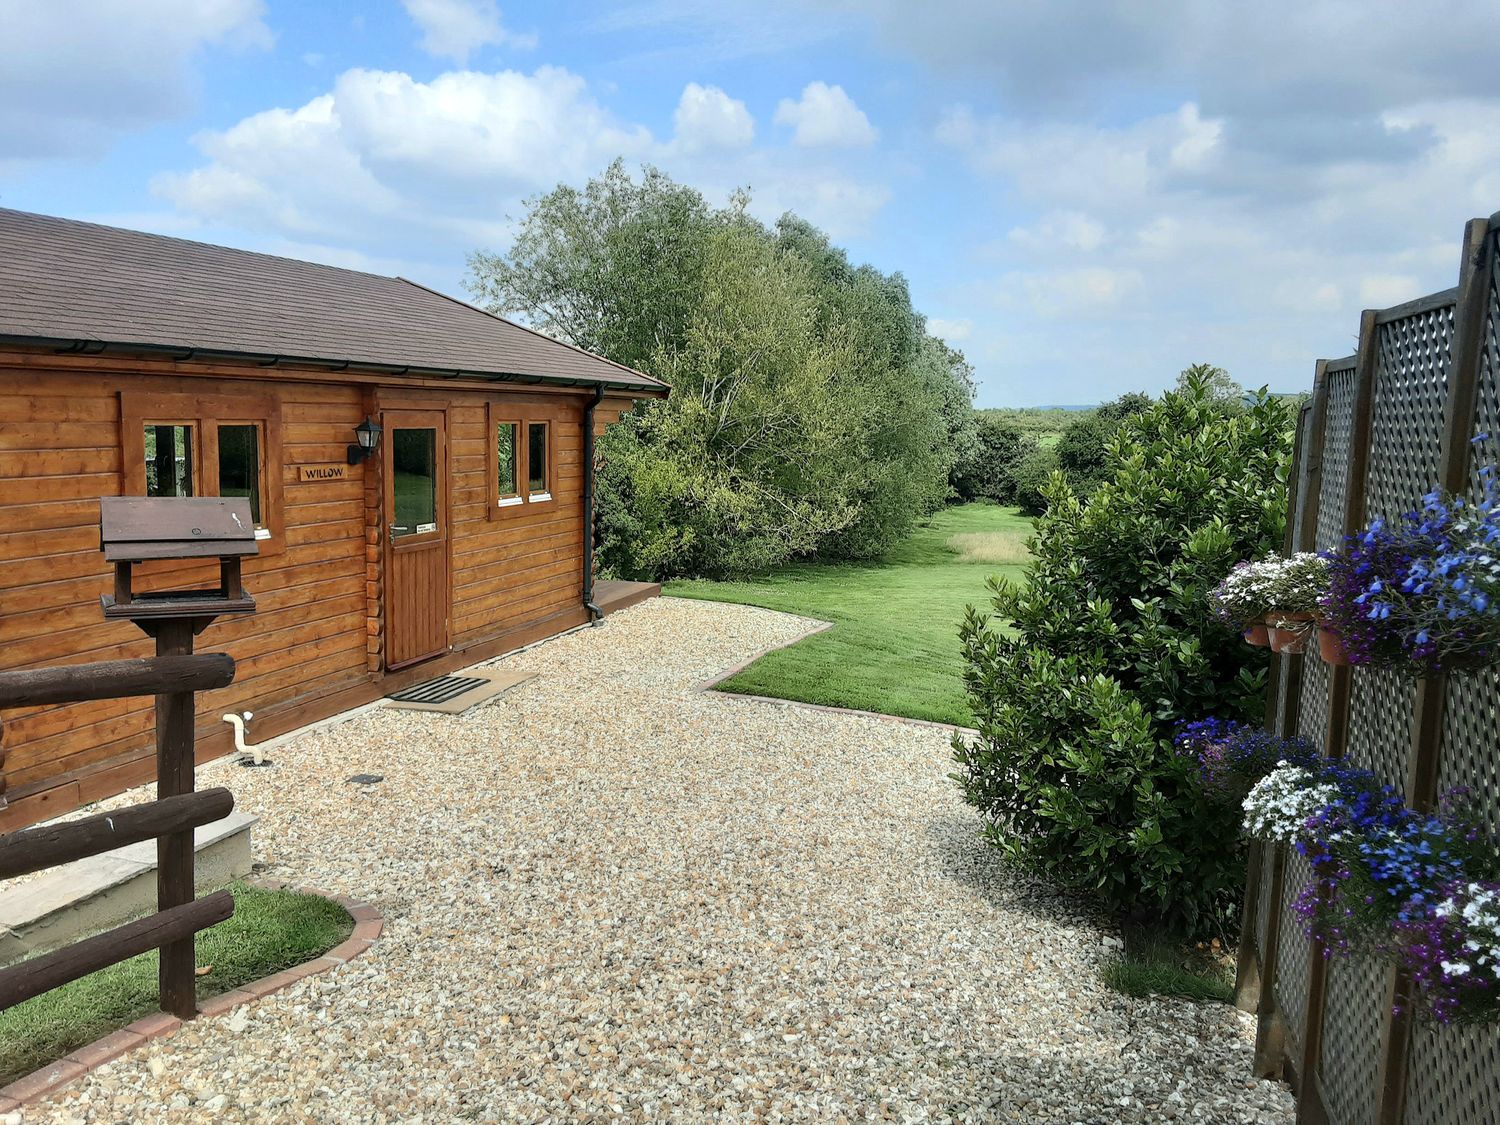 Pennylands Willow Lodge - Cotswolds - 915108 - photo 1